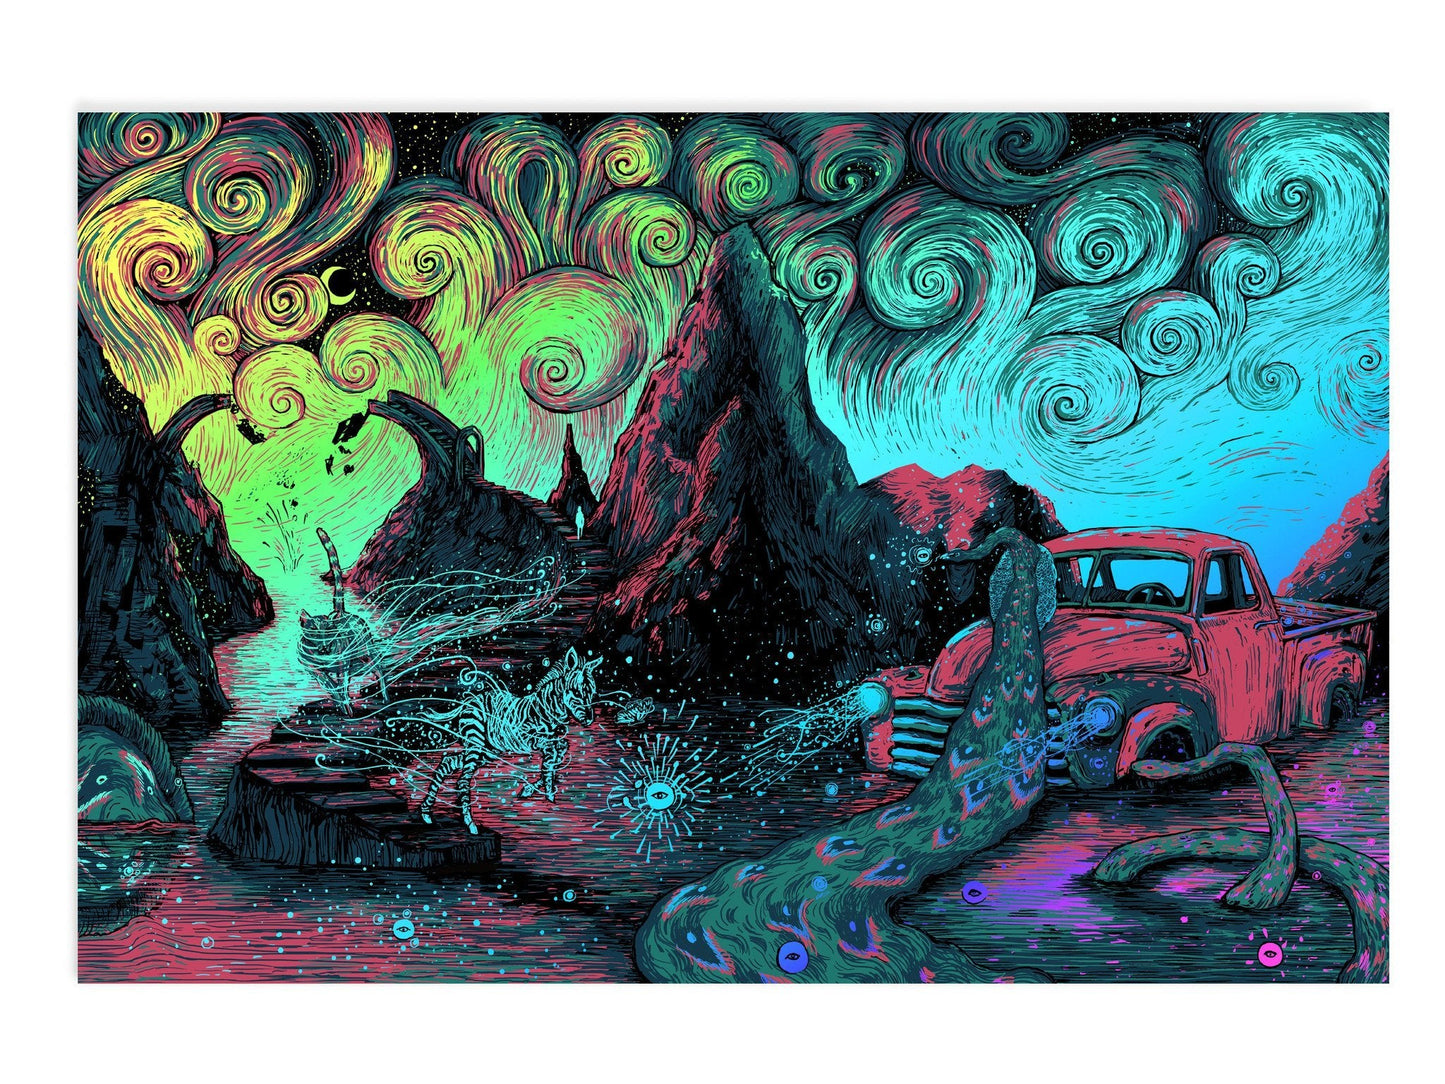 The Unraveling (Foil edition of 25) Print James R. Eads